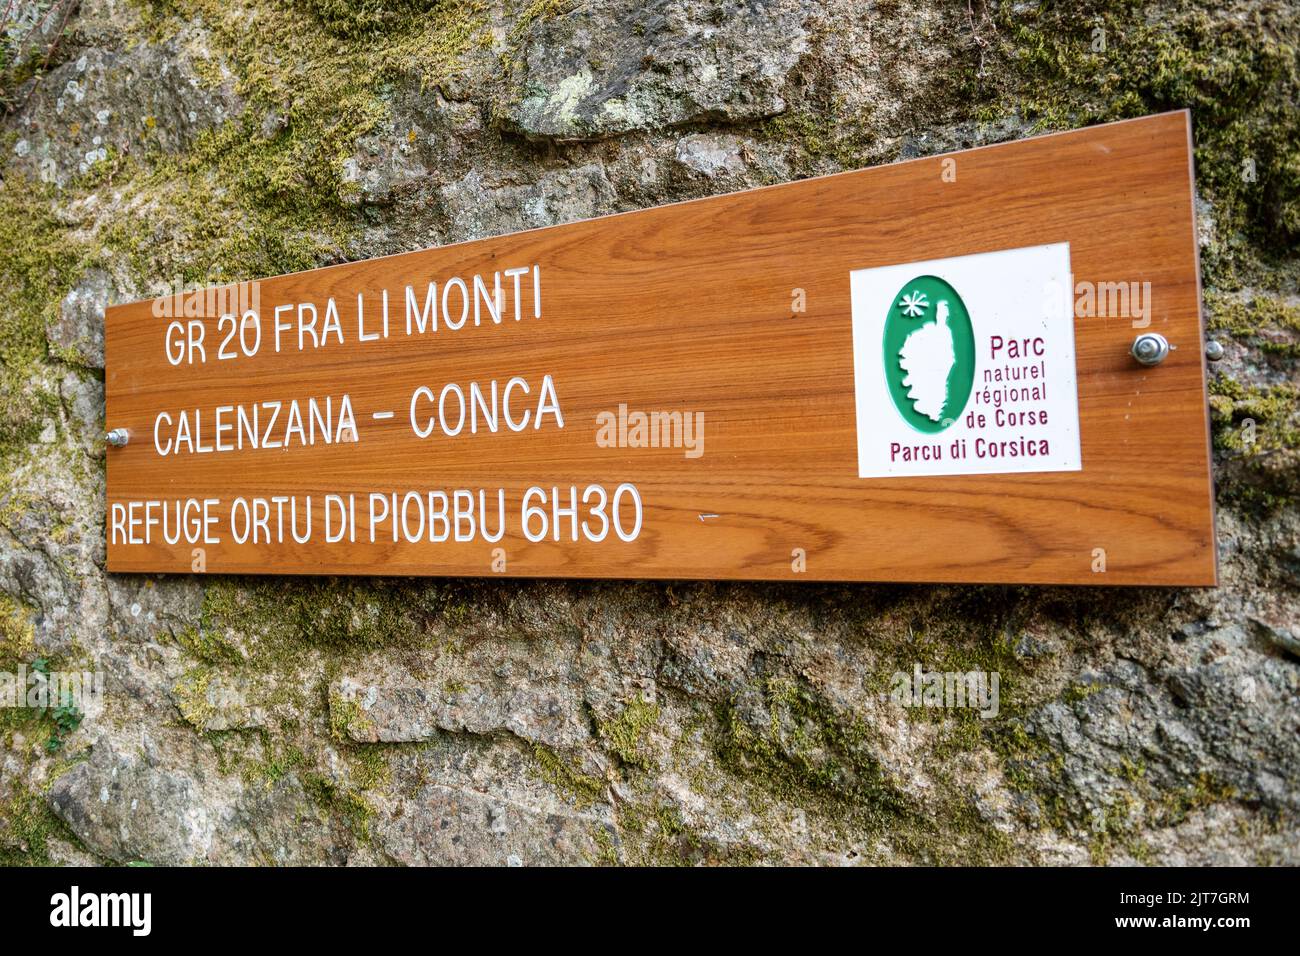 Sign at the start of the GR20 Fra Li Monti in Calenzana, Corsica, France Stock Photo